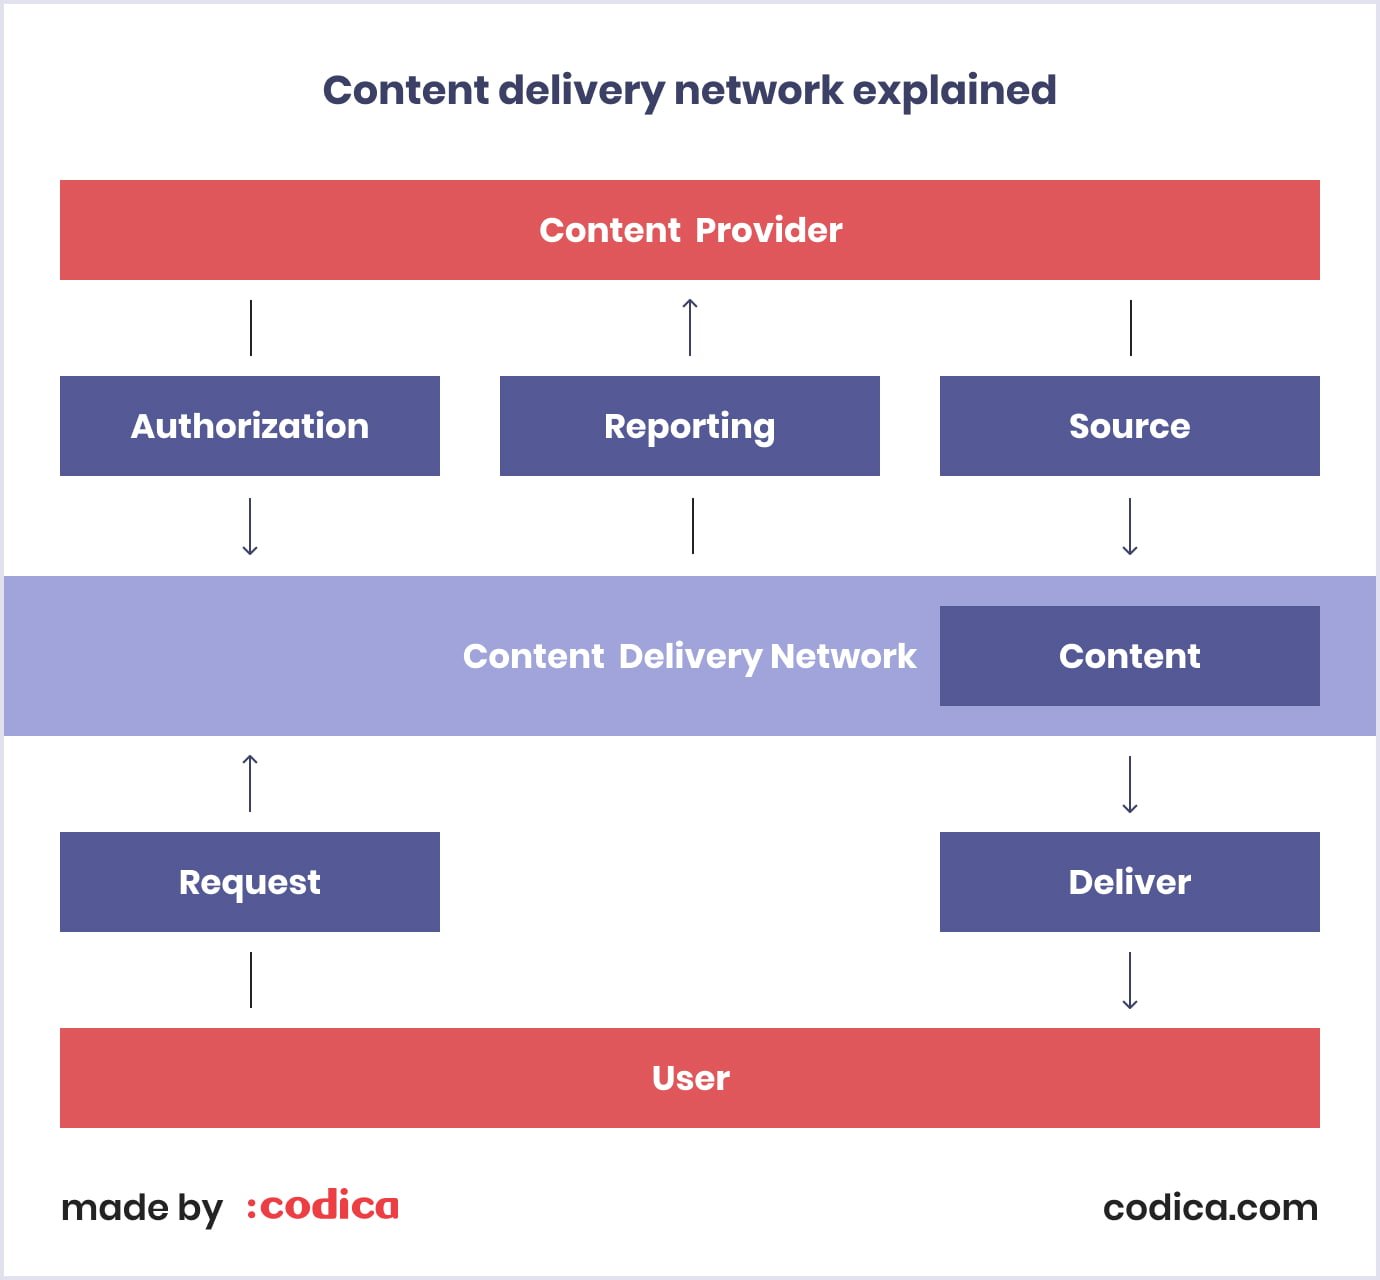 Content delivery network explained